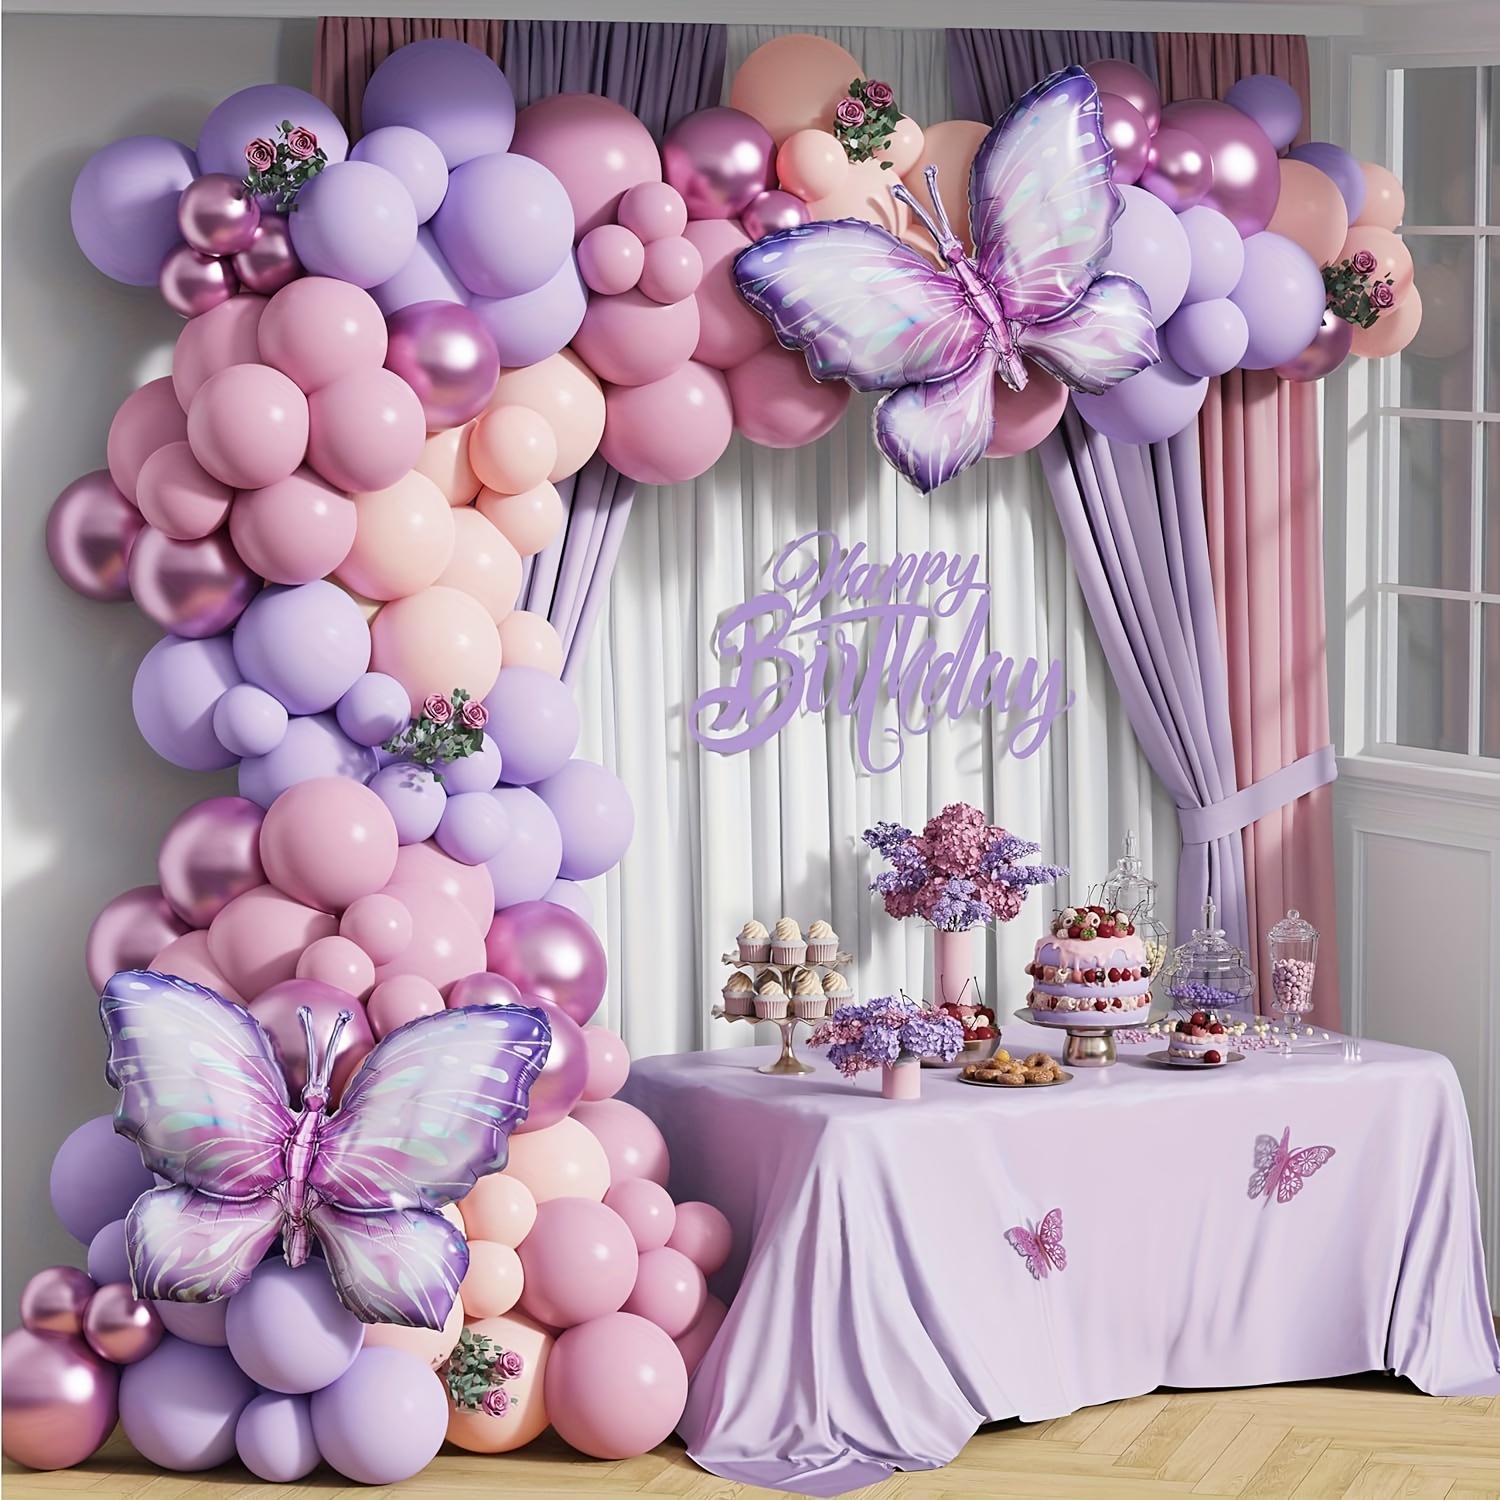 

148pcs Butterfly Balloon Arch Kit With Macaron Purple Pink Orange Balloons & Foil Butterflies For Birthday, Spring/summer/fall/winter Decor - Suitable For Ages 14+ No Electricity Needed